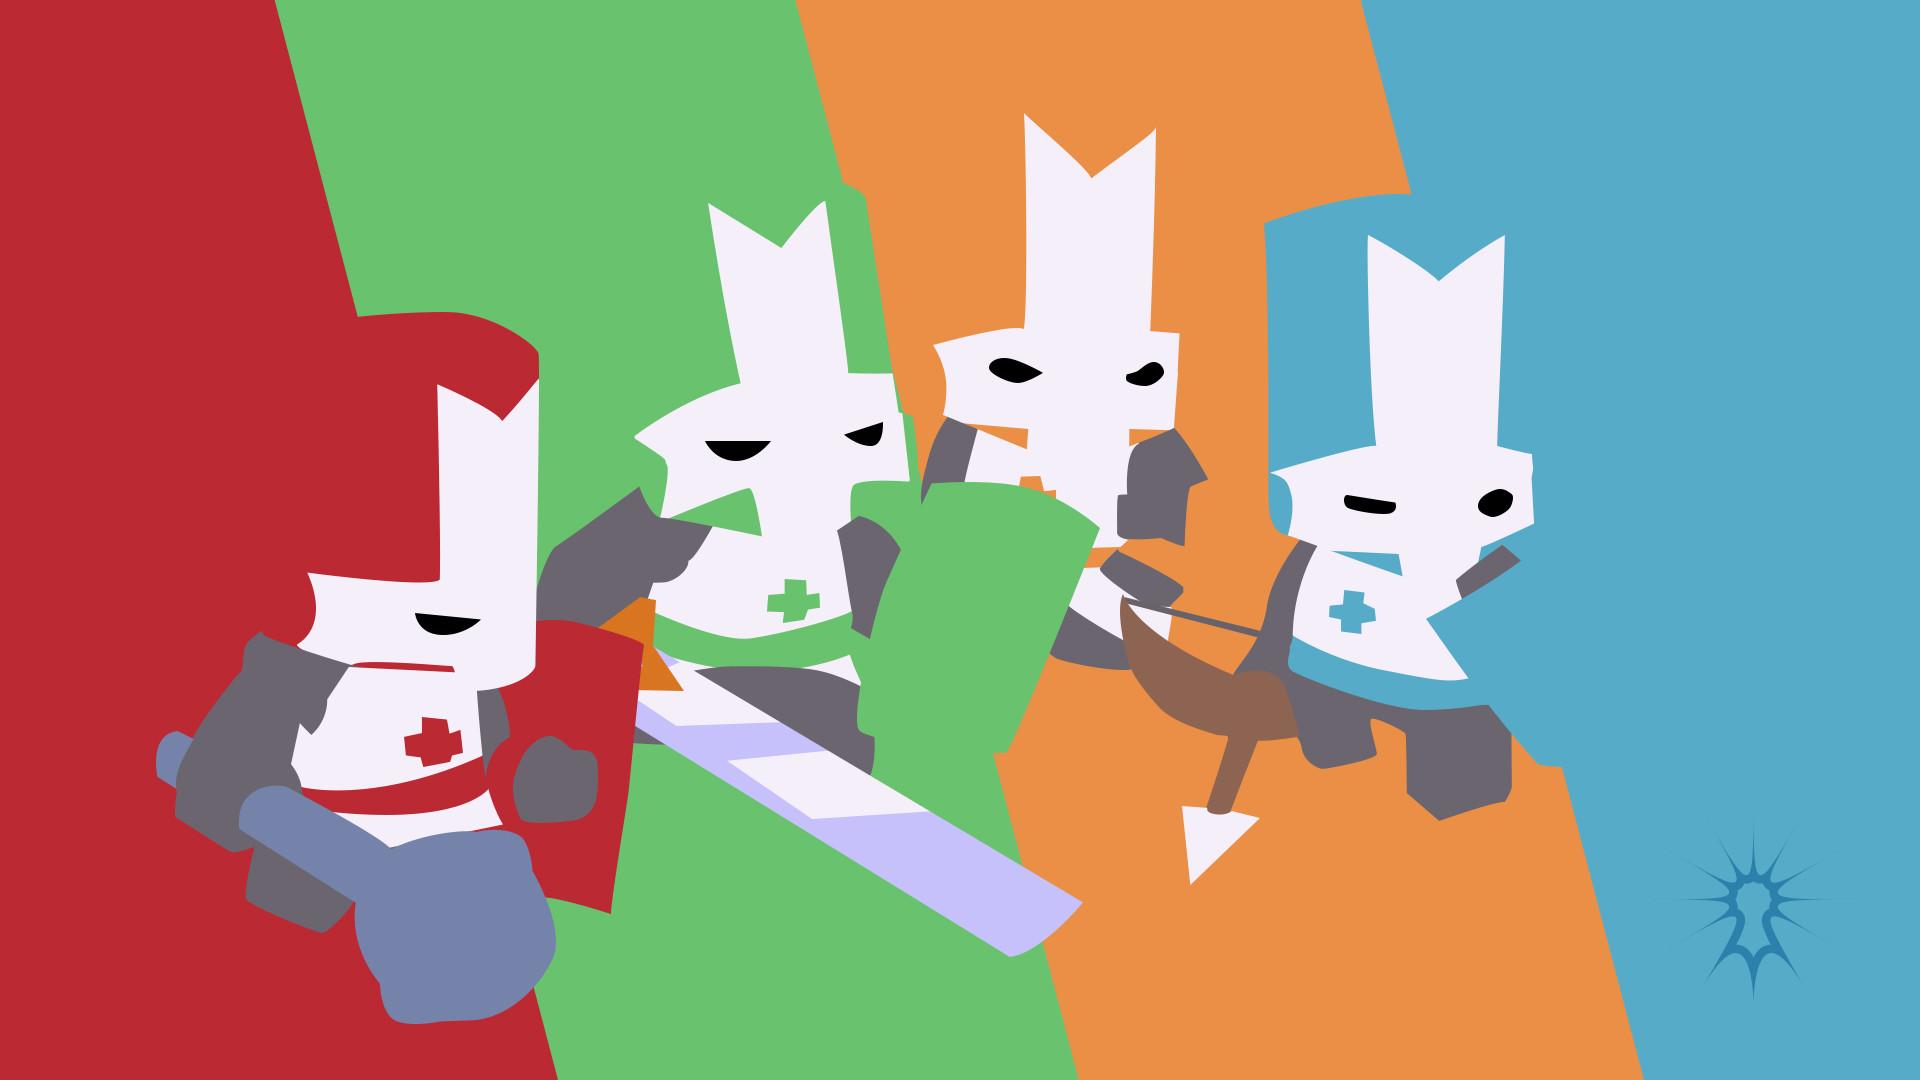 Castle Crashers Remastered Wallpapers - Wallpaper Cave